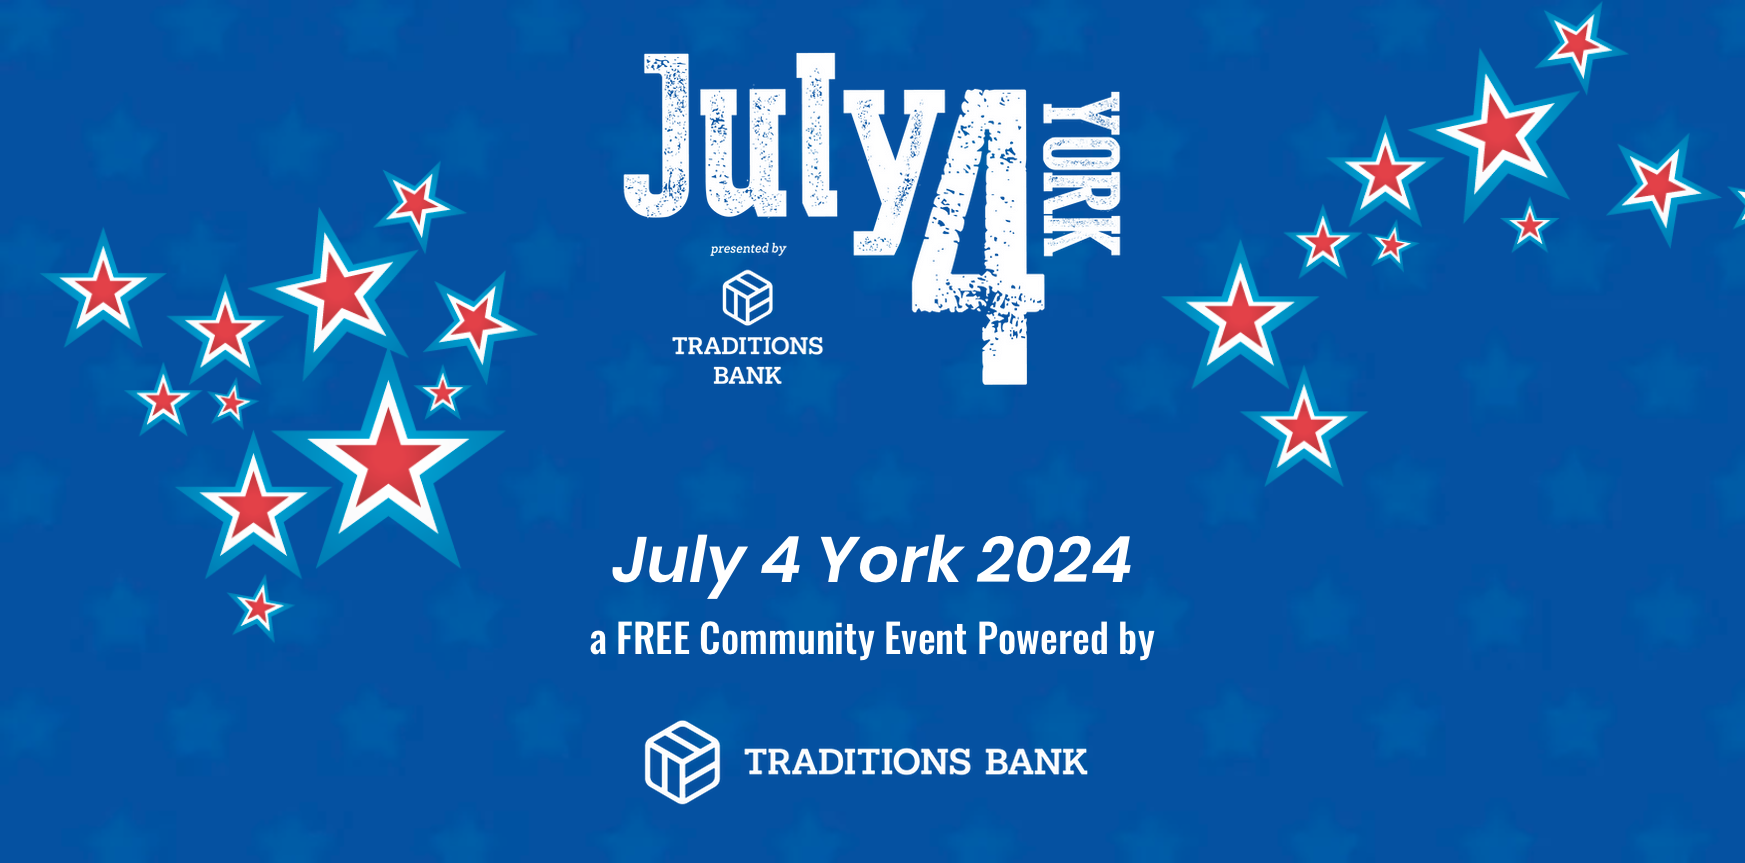 July4York free community event powered by Traditions Bank graphic on a blue background with red, white, and blue stars